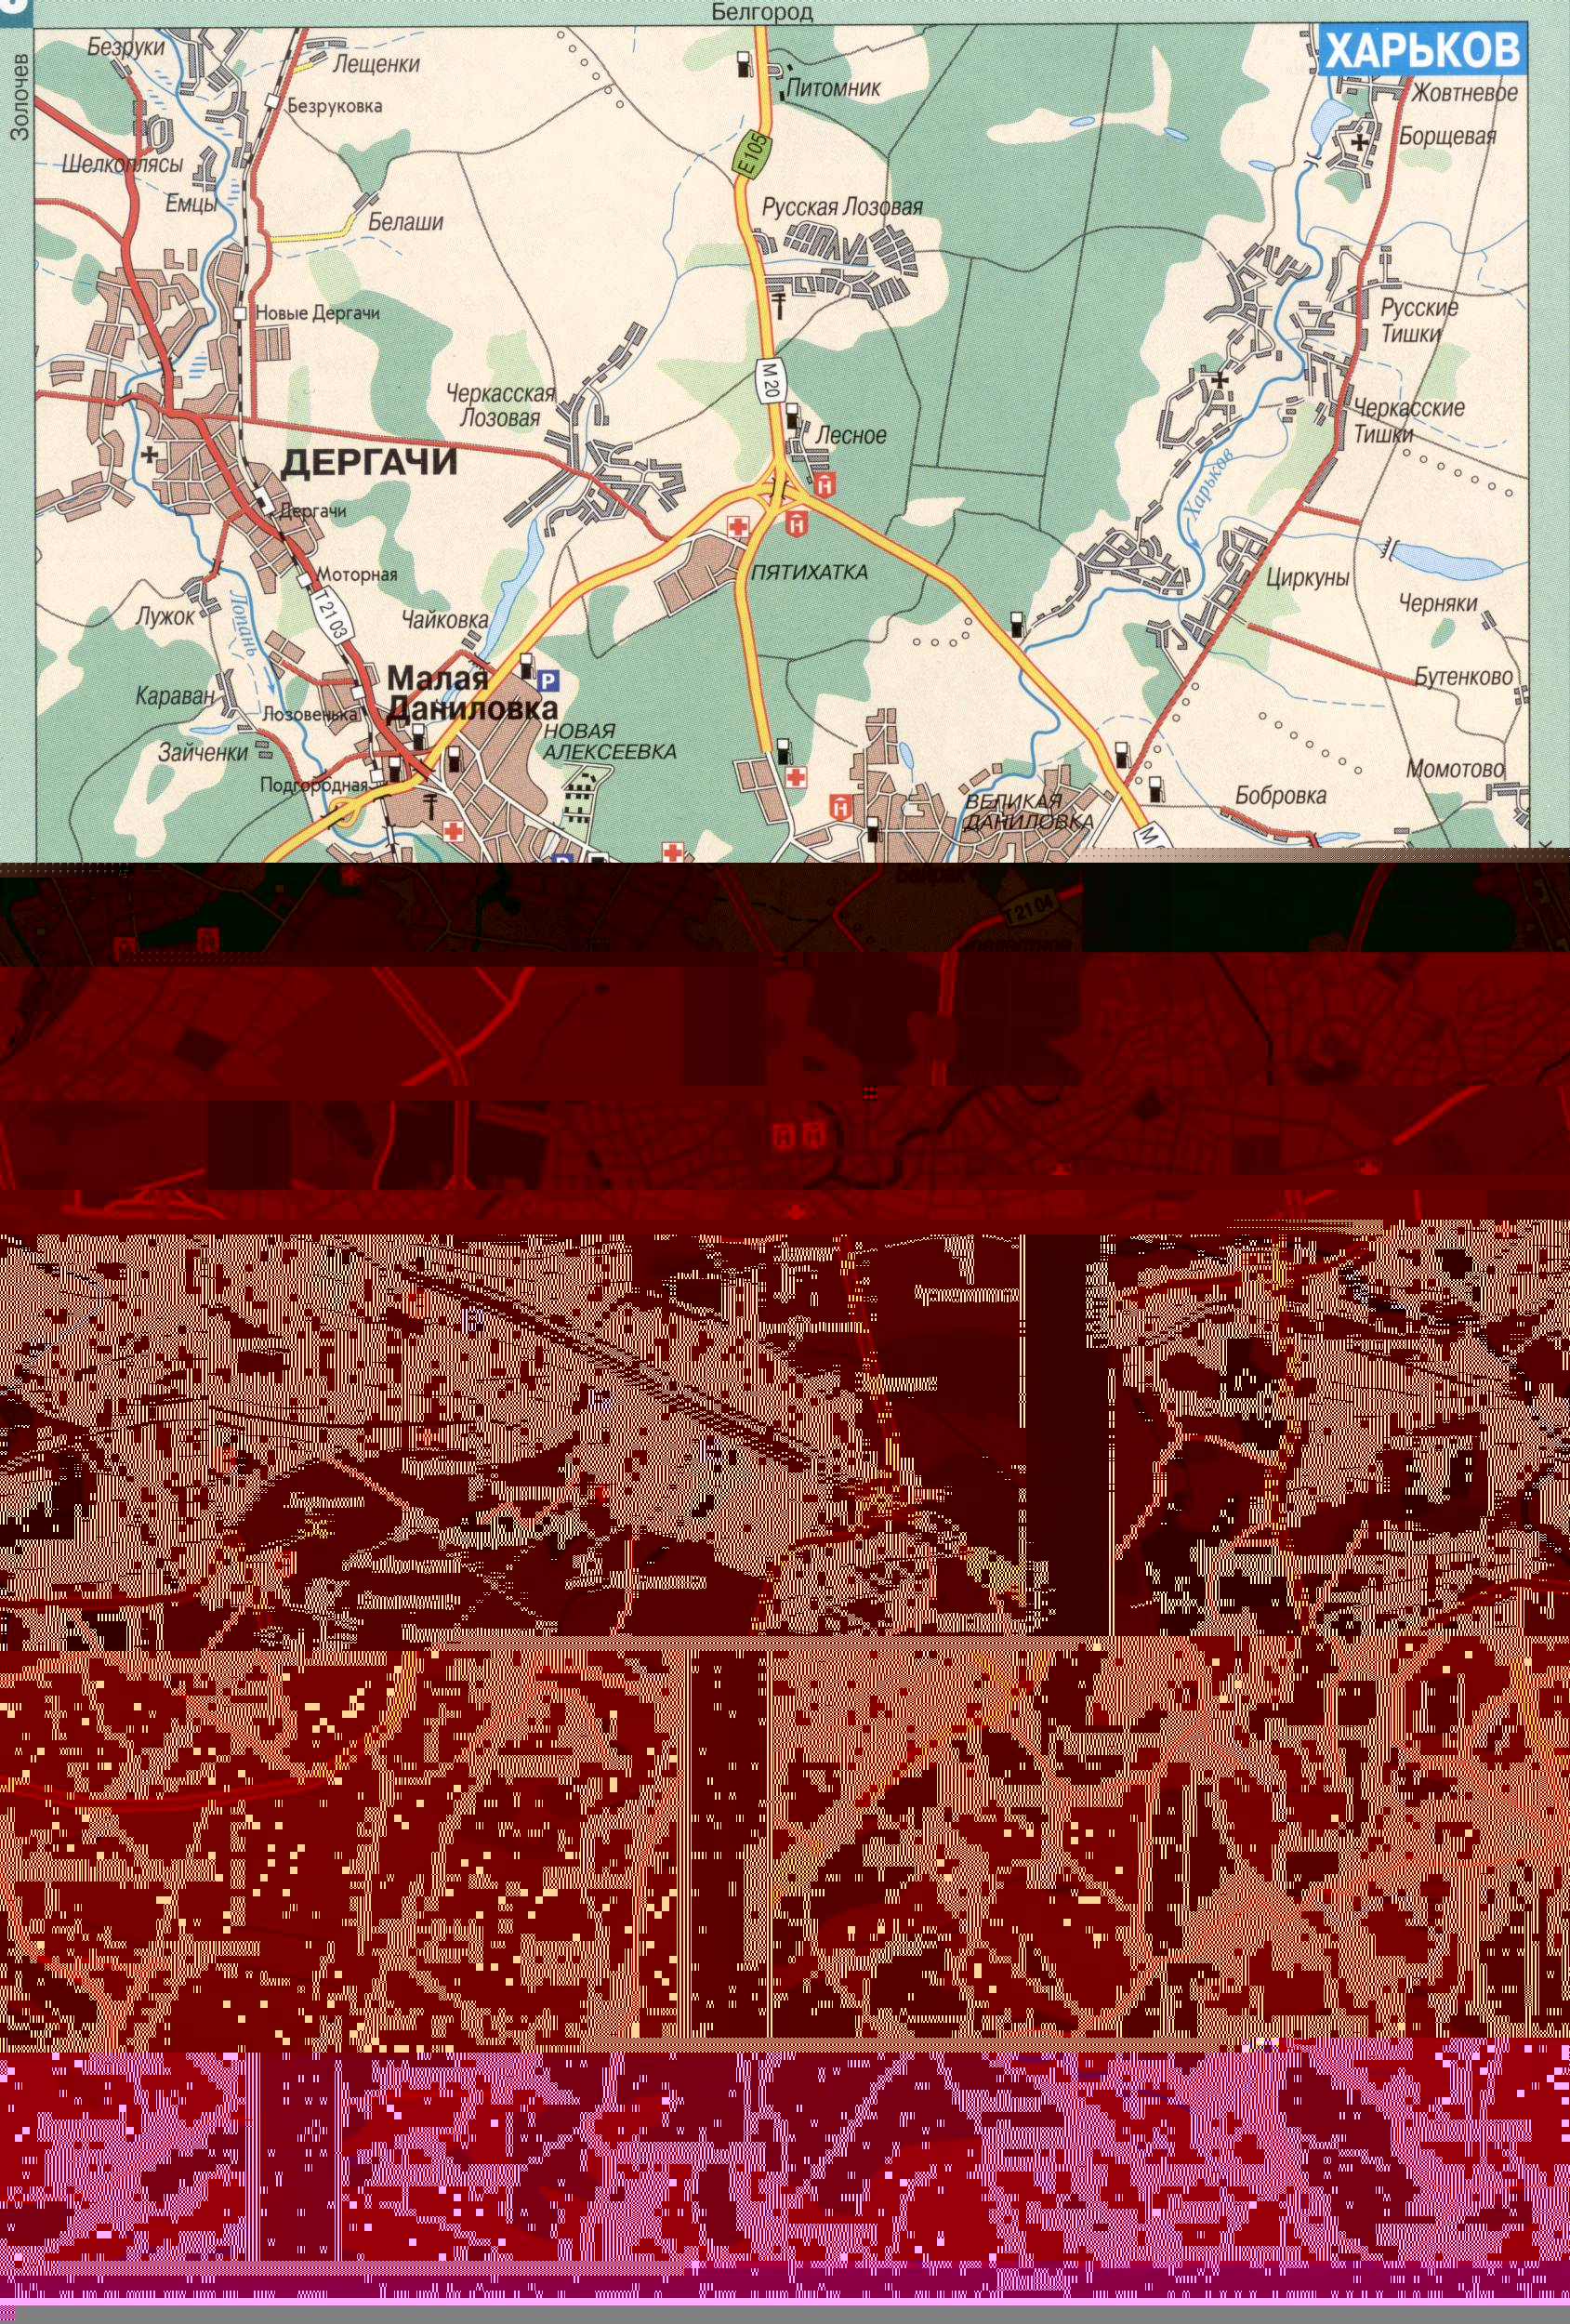 Map of Kharkov (Kharkov map of highways). Map of the roads of the surroundings of Kharkov free download (map of Ukraine, Kharkov)